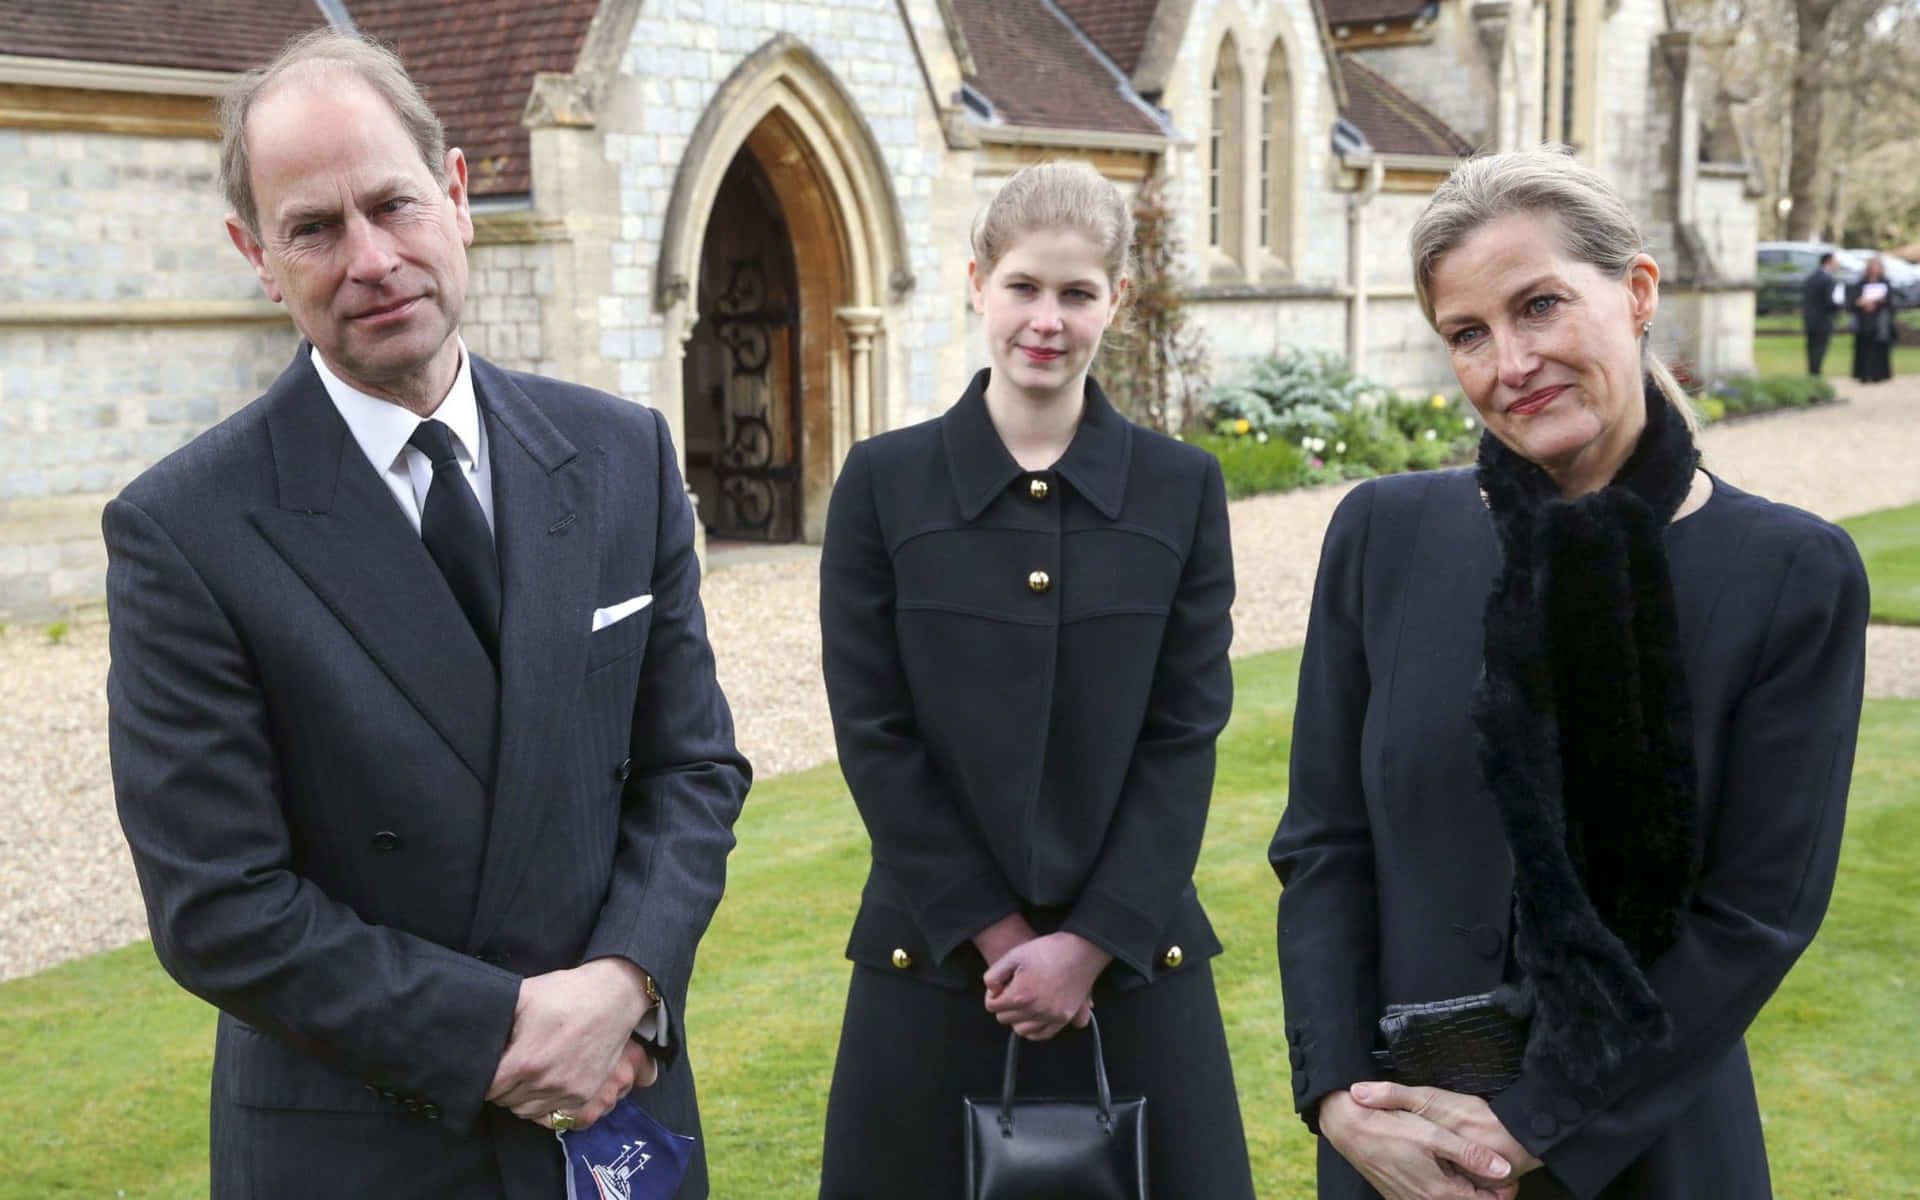 Prince Edward With Wife And Daughter Wallpaper